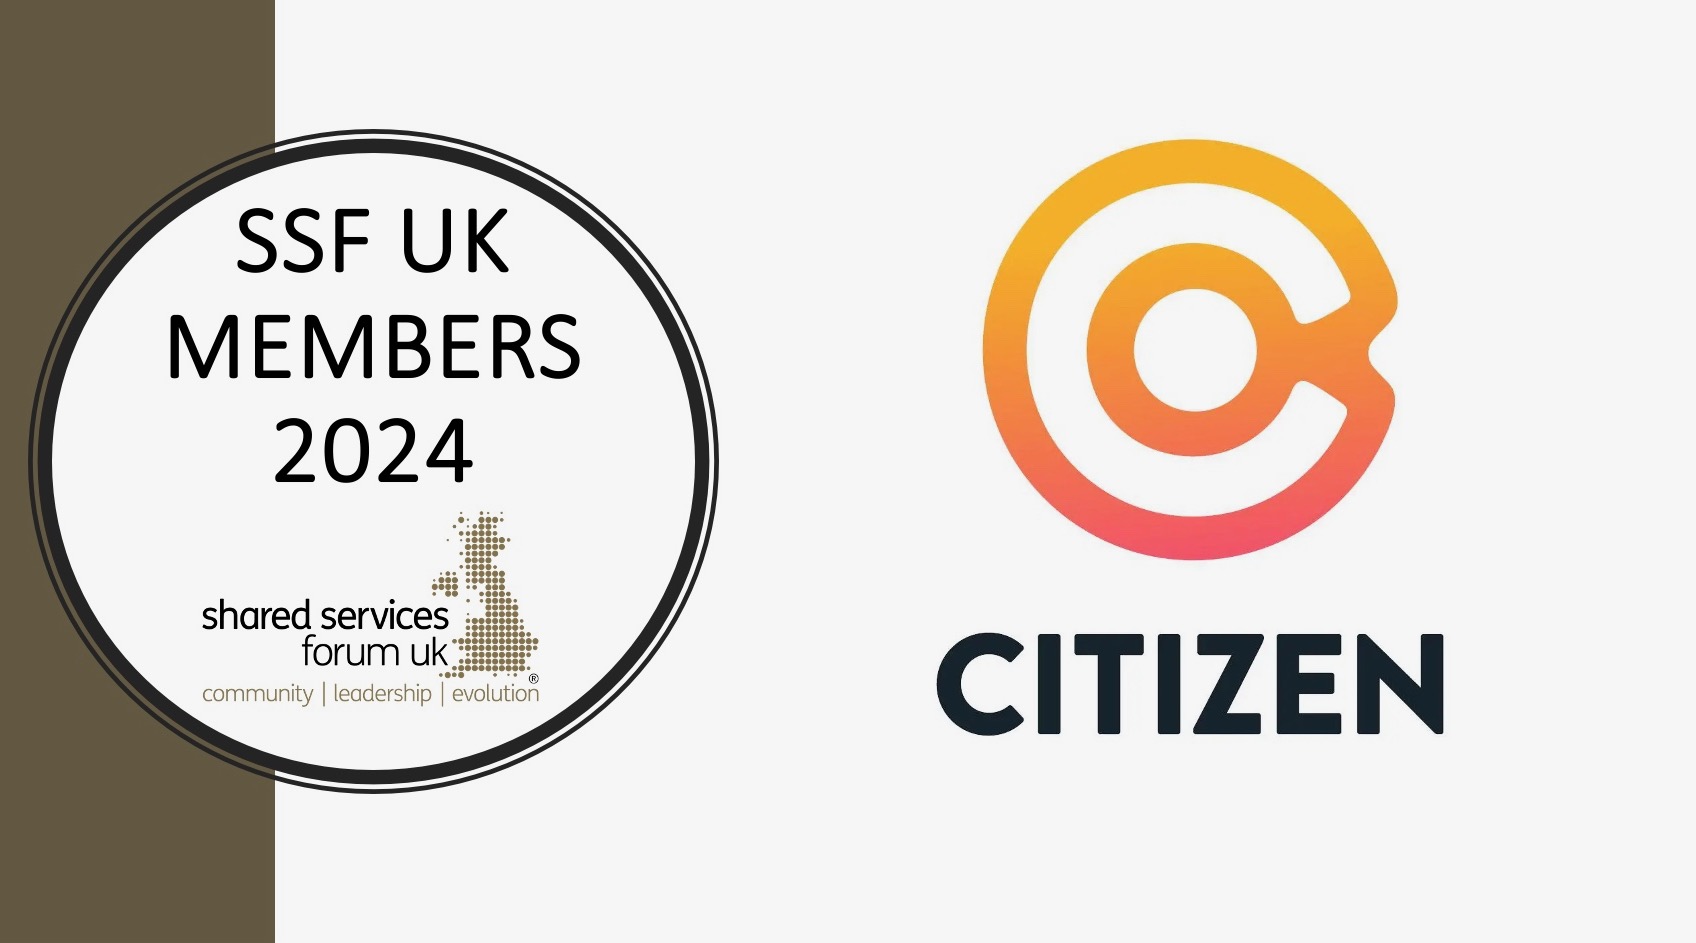 WELCOMING CITIZEN AS NEW SSF UK MEMBERS